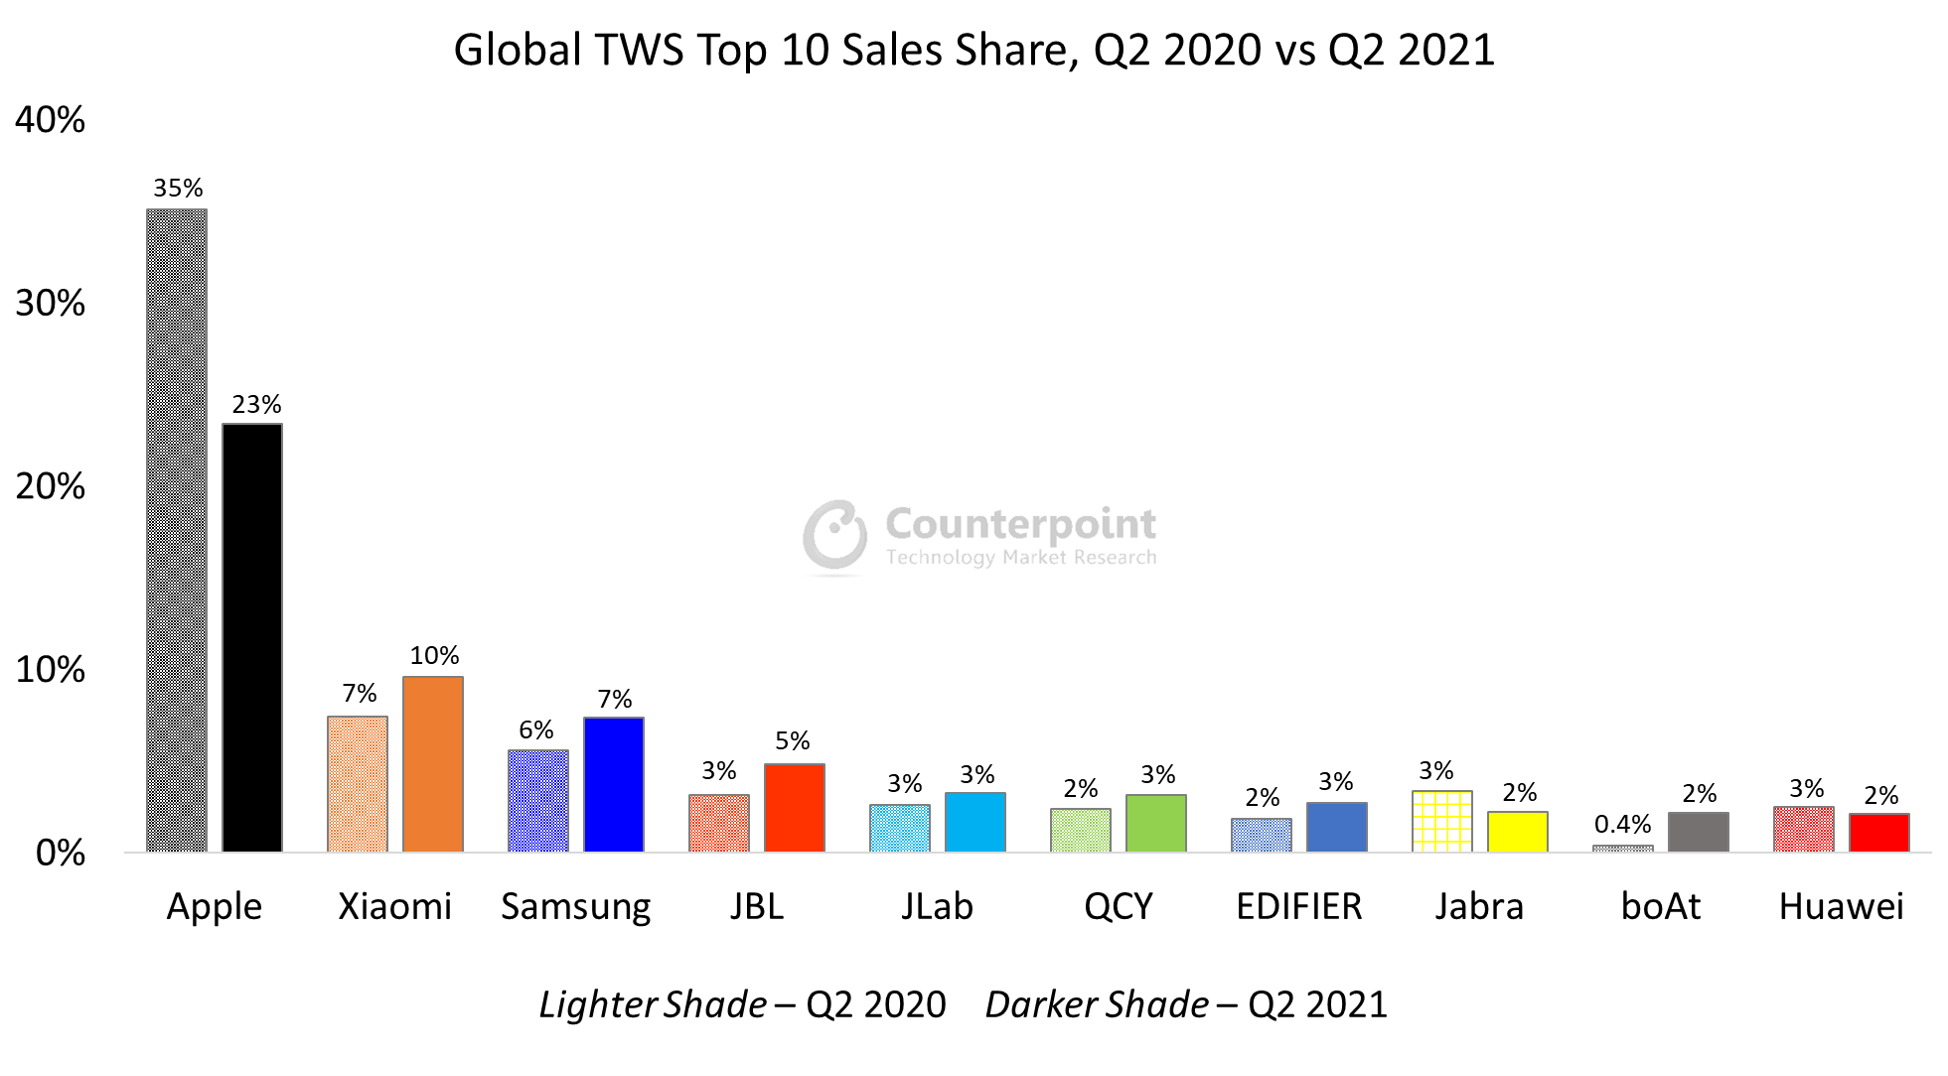 Counterpoint Research Global TWS Top 10 Brand Share Q2 2021